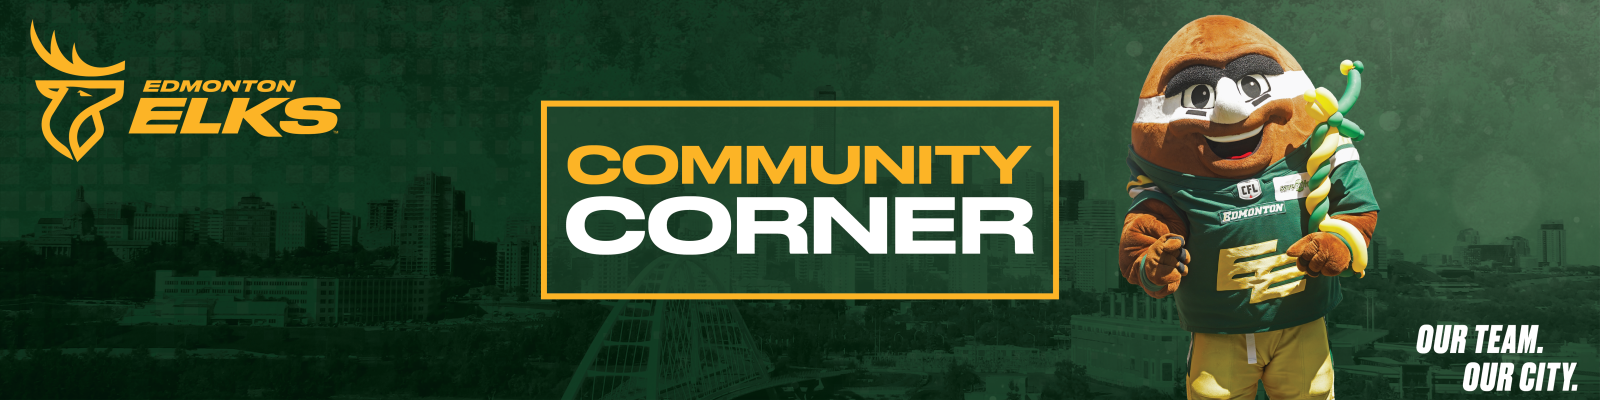 Community Corner - Our Team. Our City.